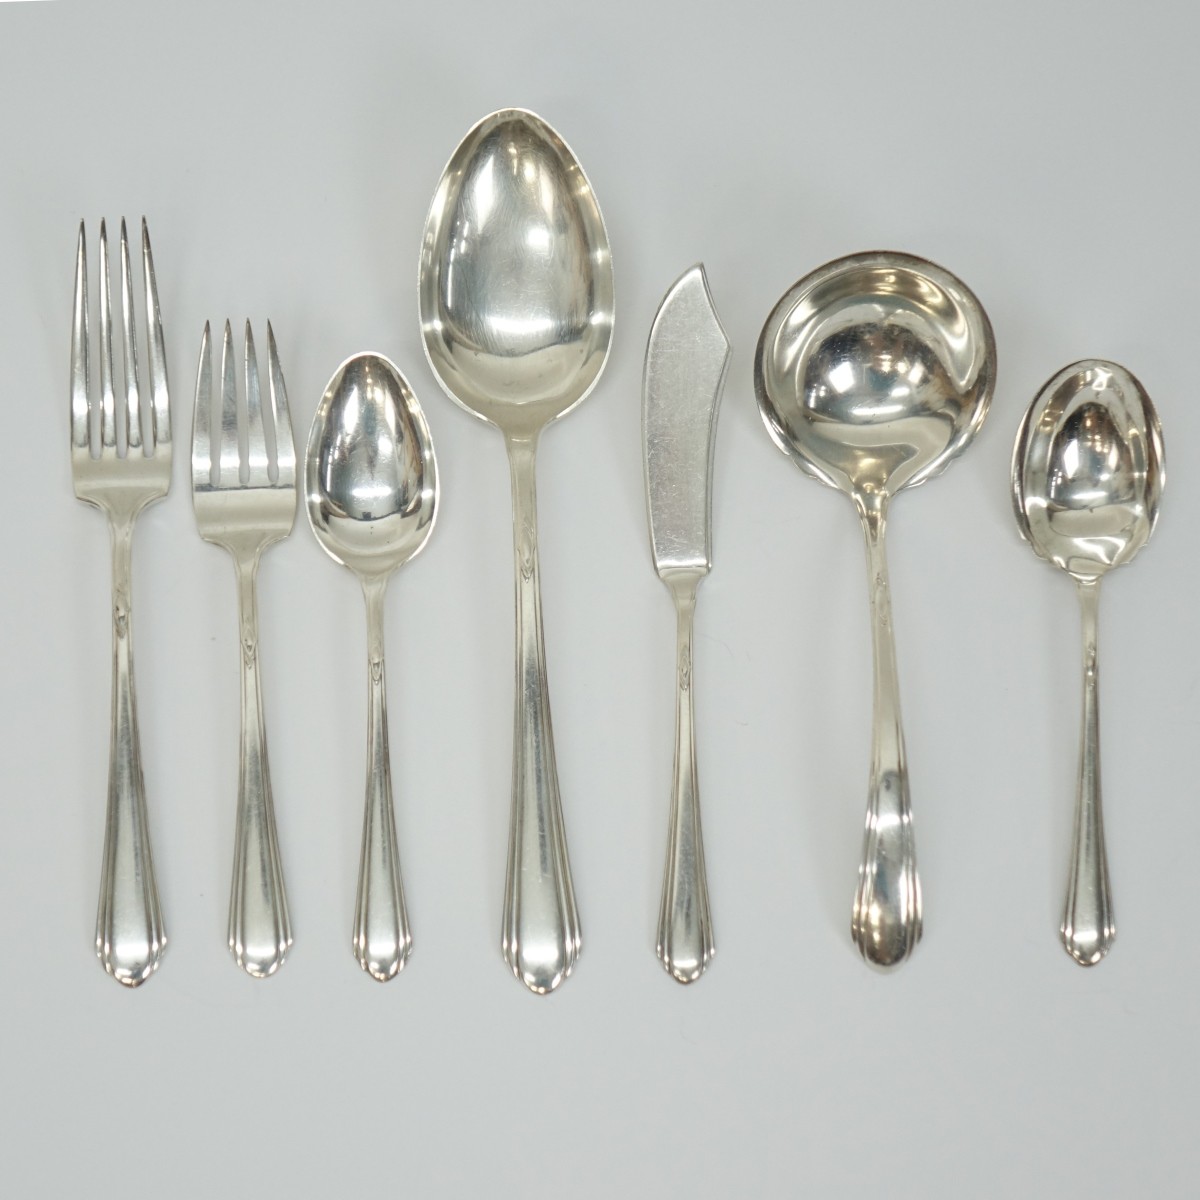 64) Pc. Towle "Lady Diana" Sterling Flatware